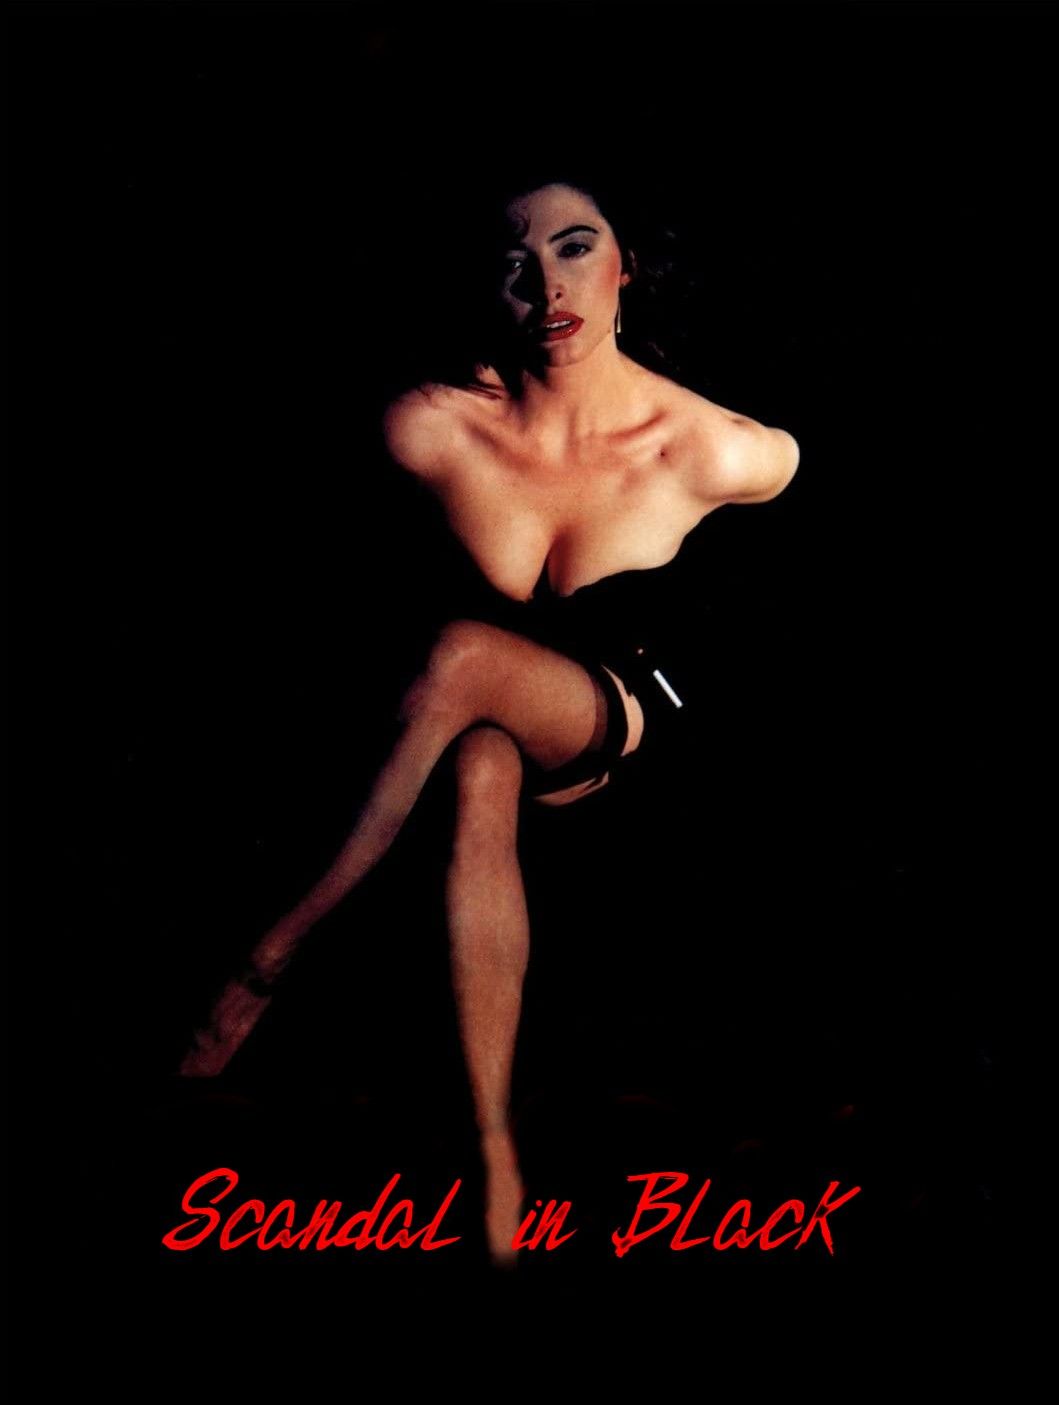 [18+] Scandal in Black (1990) Hindi Dubbed DVDRip download full movie